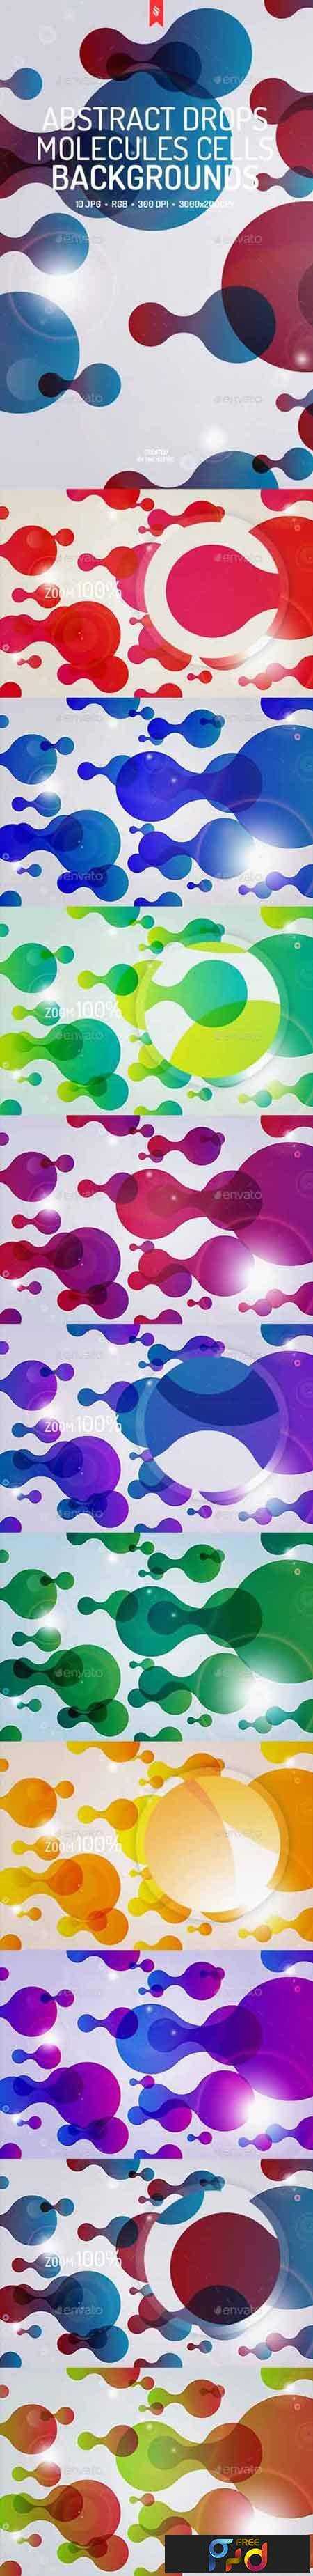 FreePsdVn.com_1702410_STOCK_abstract_drops_molecules_cells_backgrounds_19387163